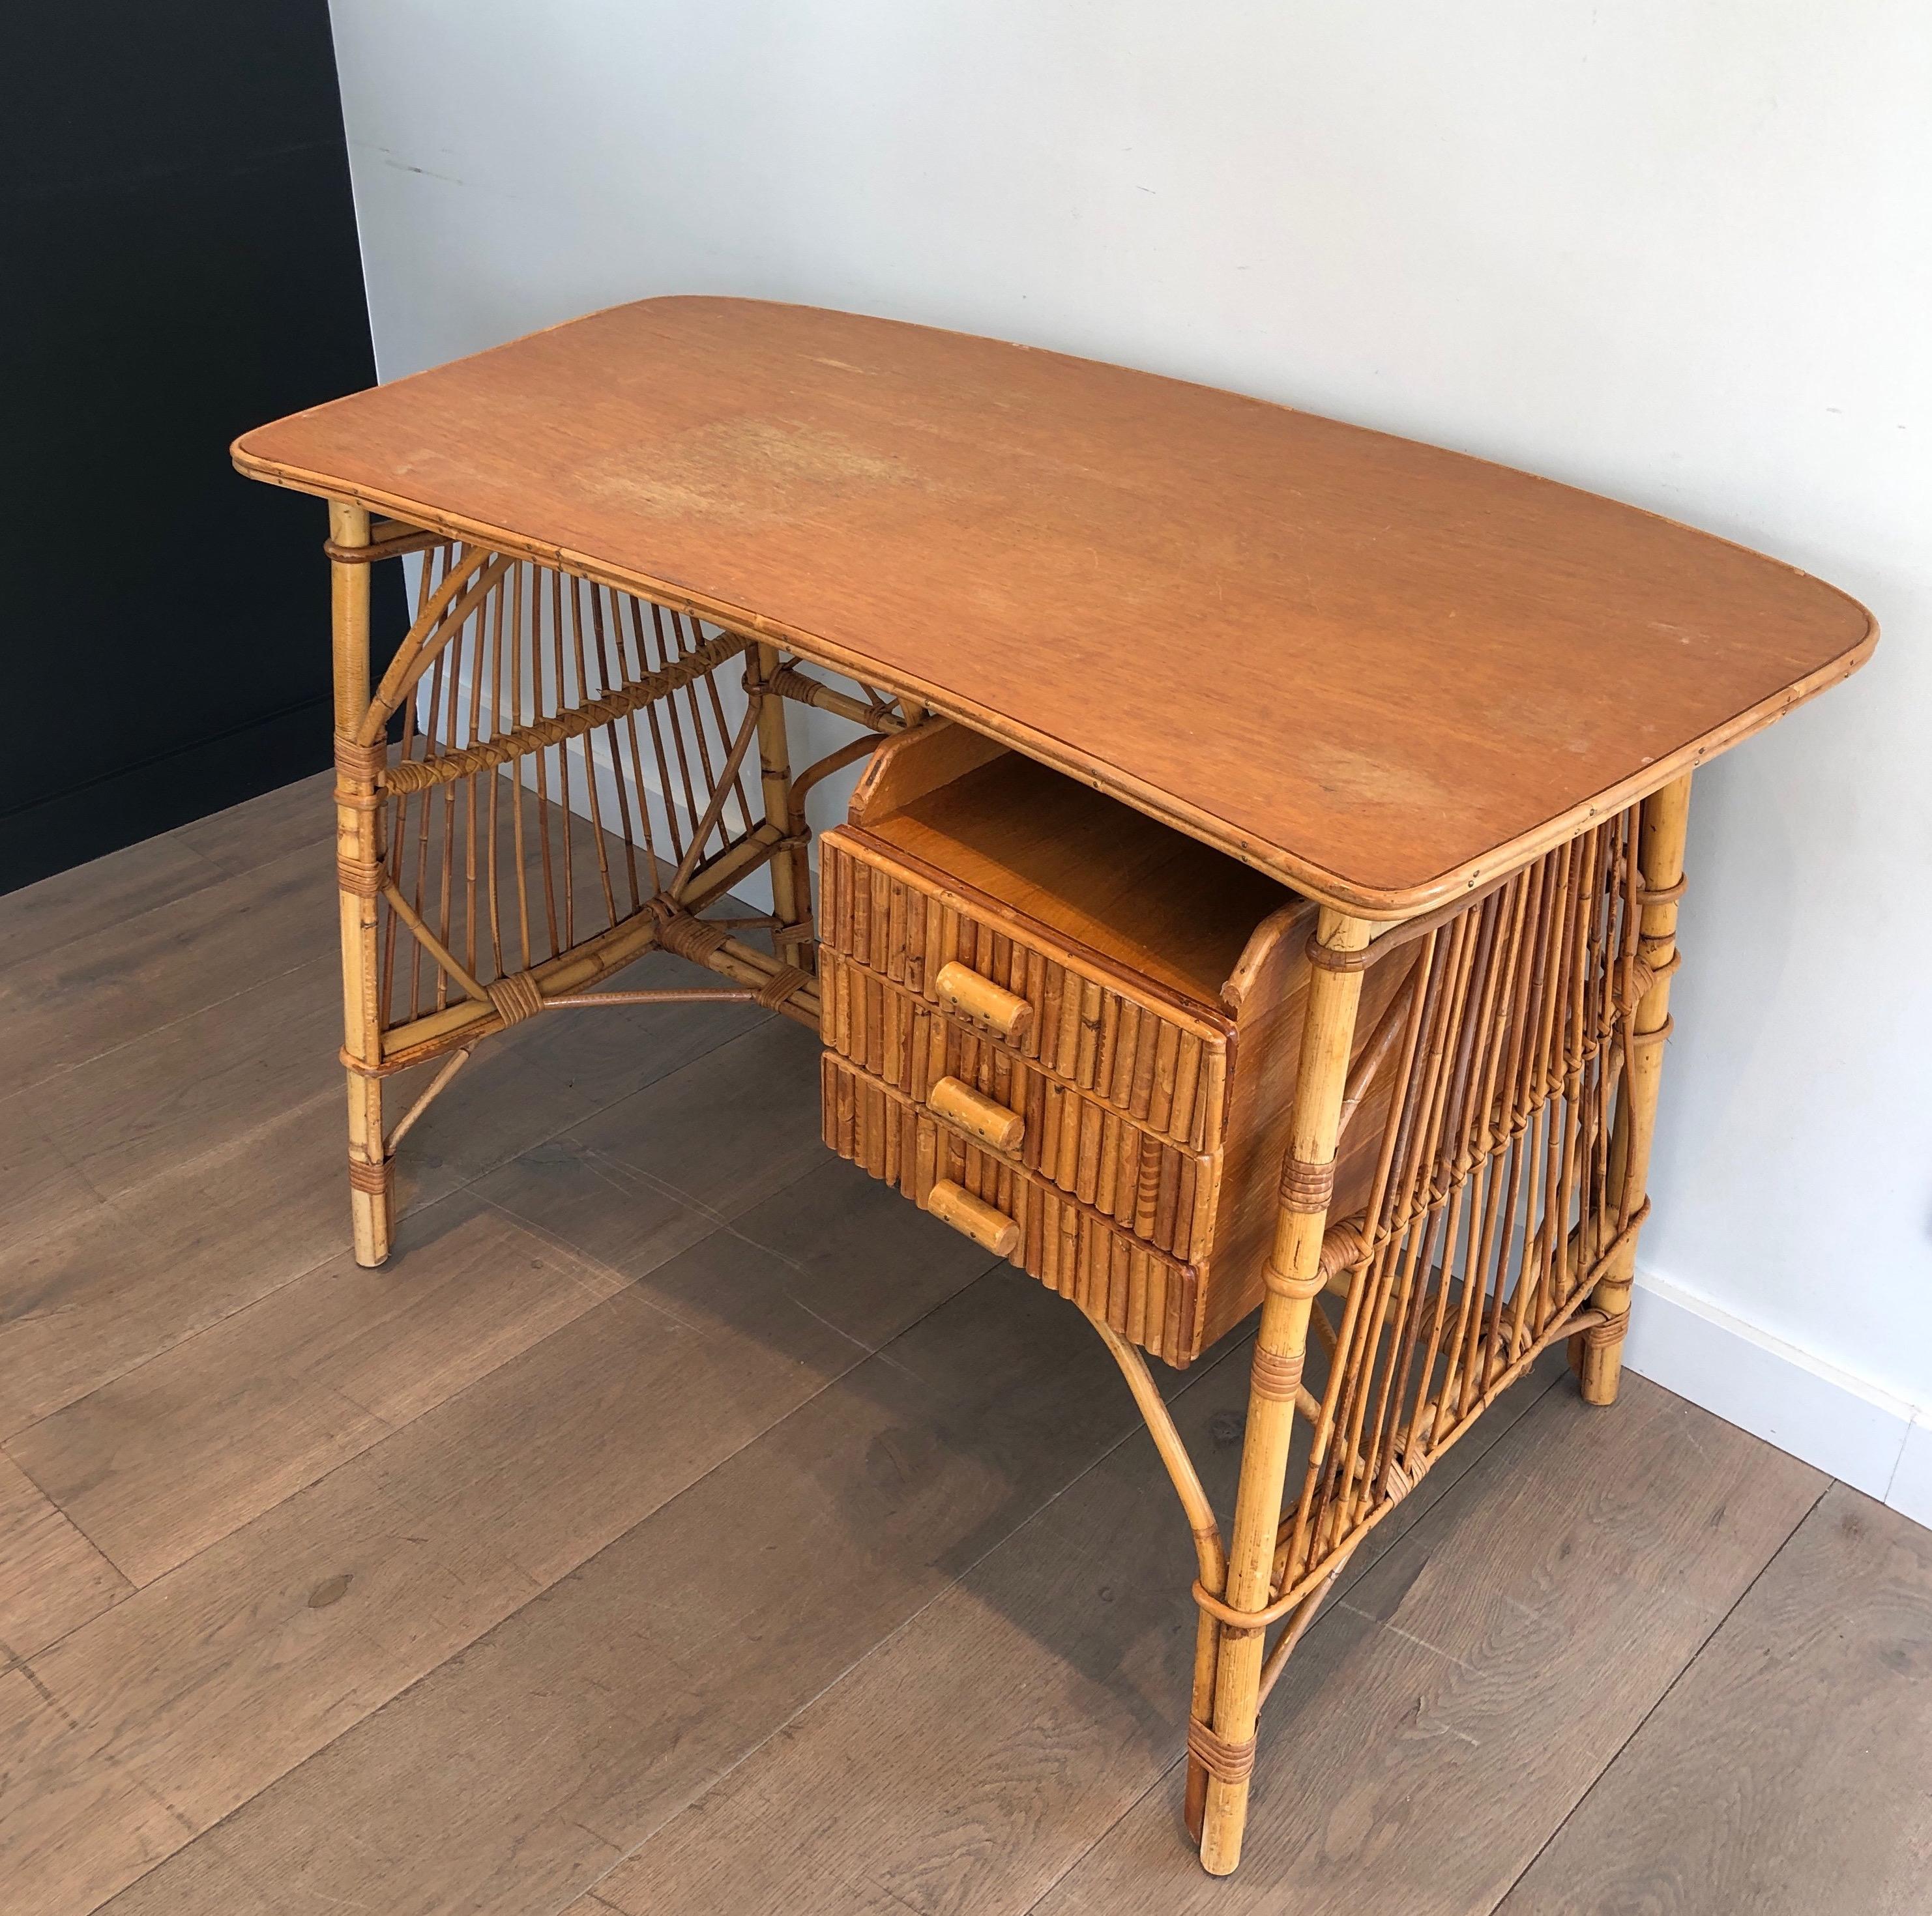 Attributed to Audoux Minet, Rattan Desk with Drawers, French, Circa 1970 For Sale 1